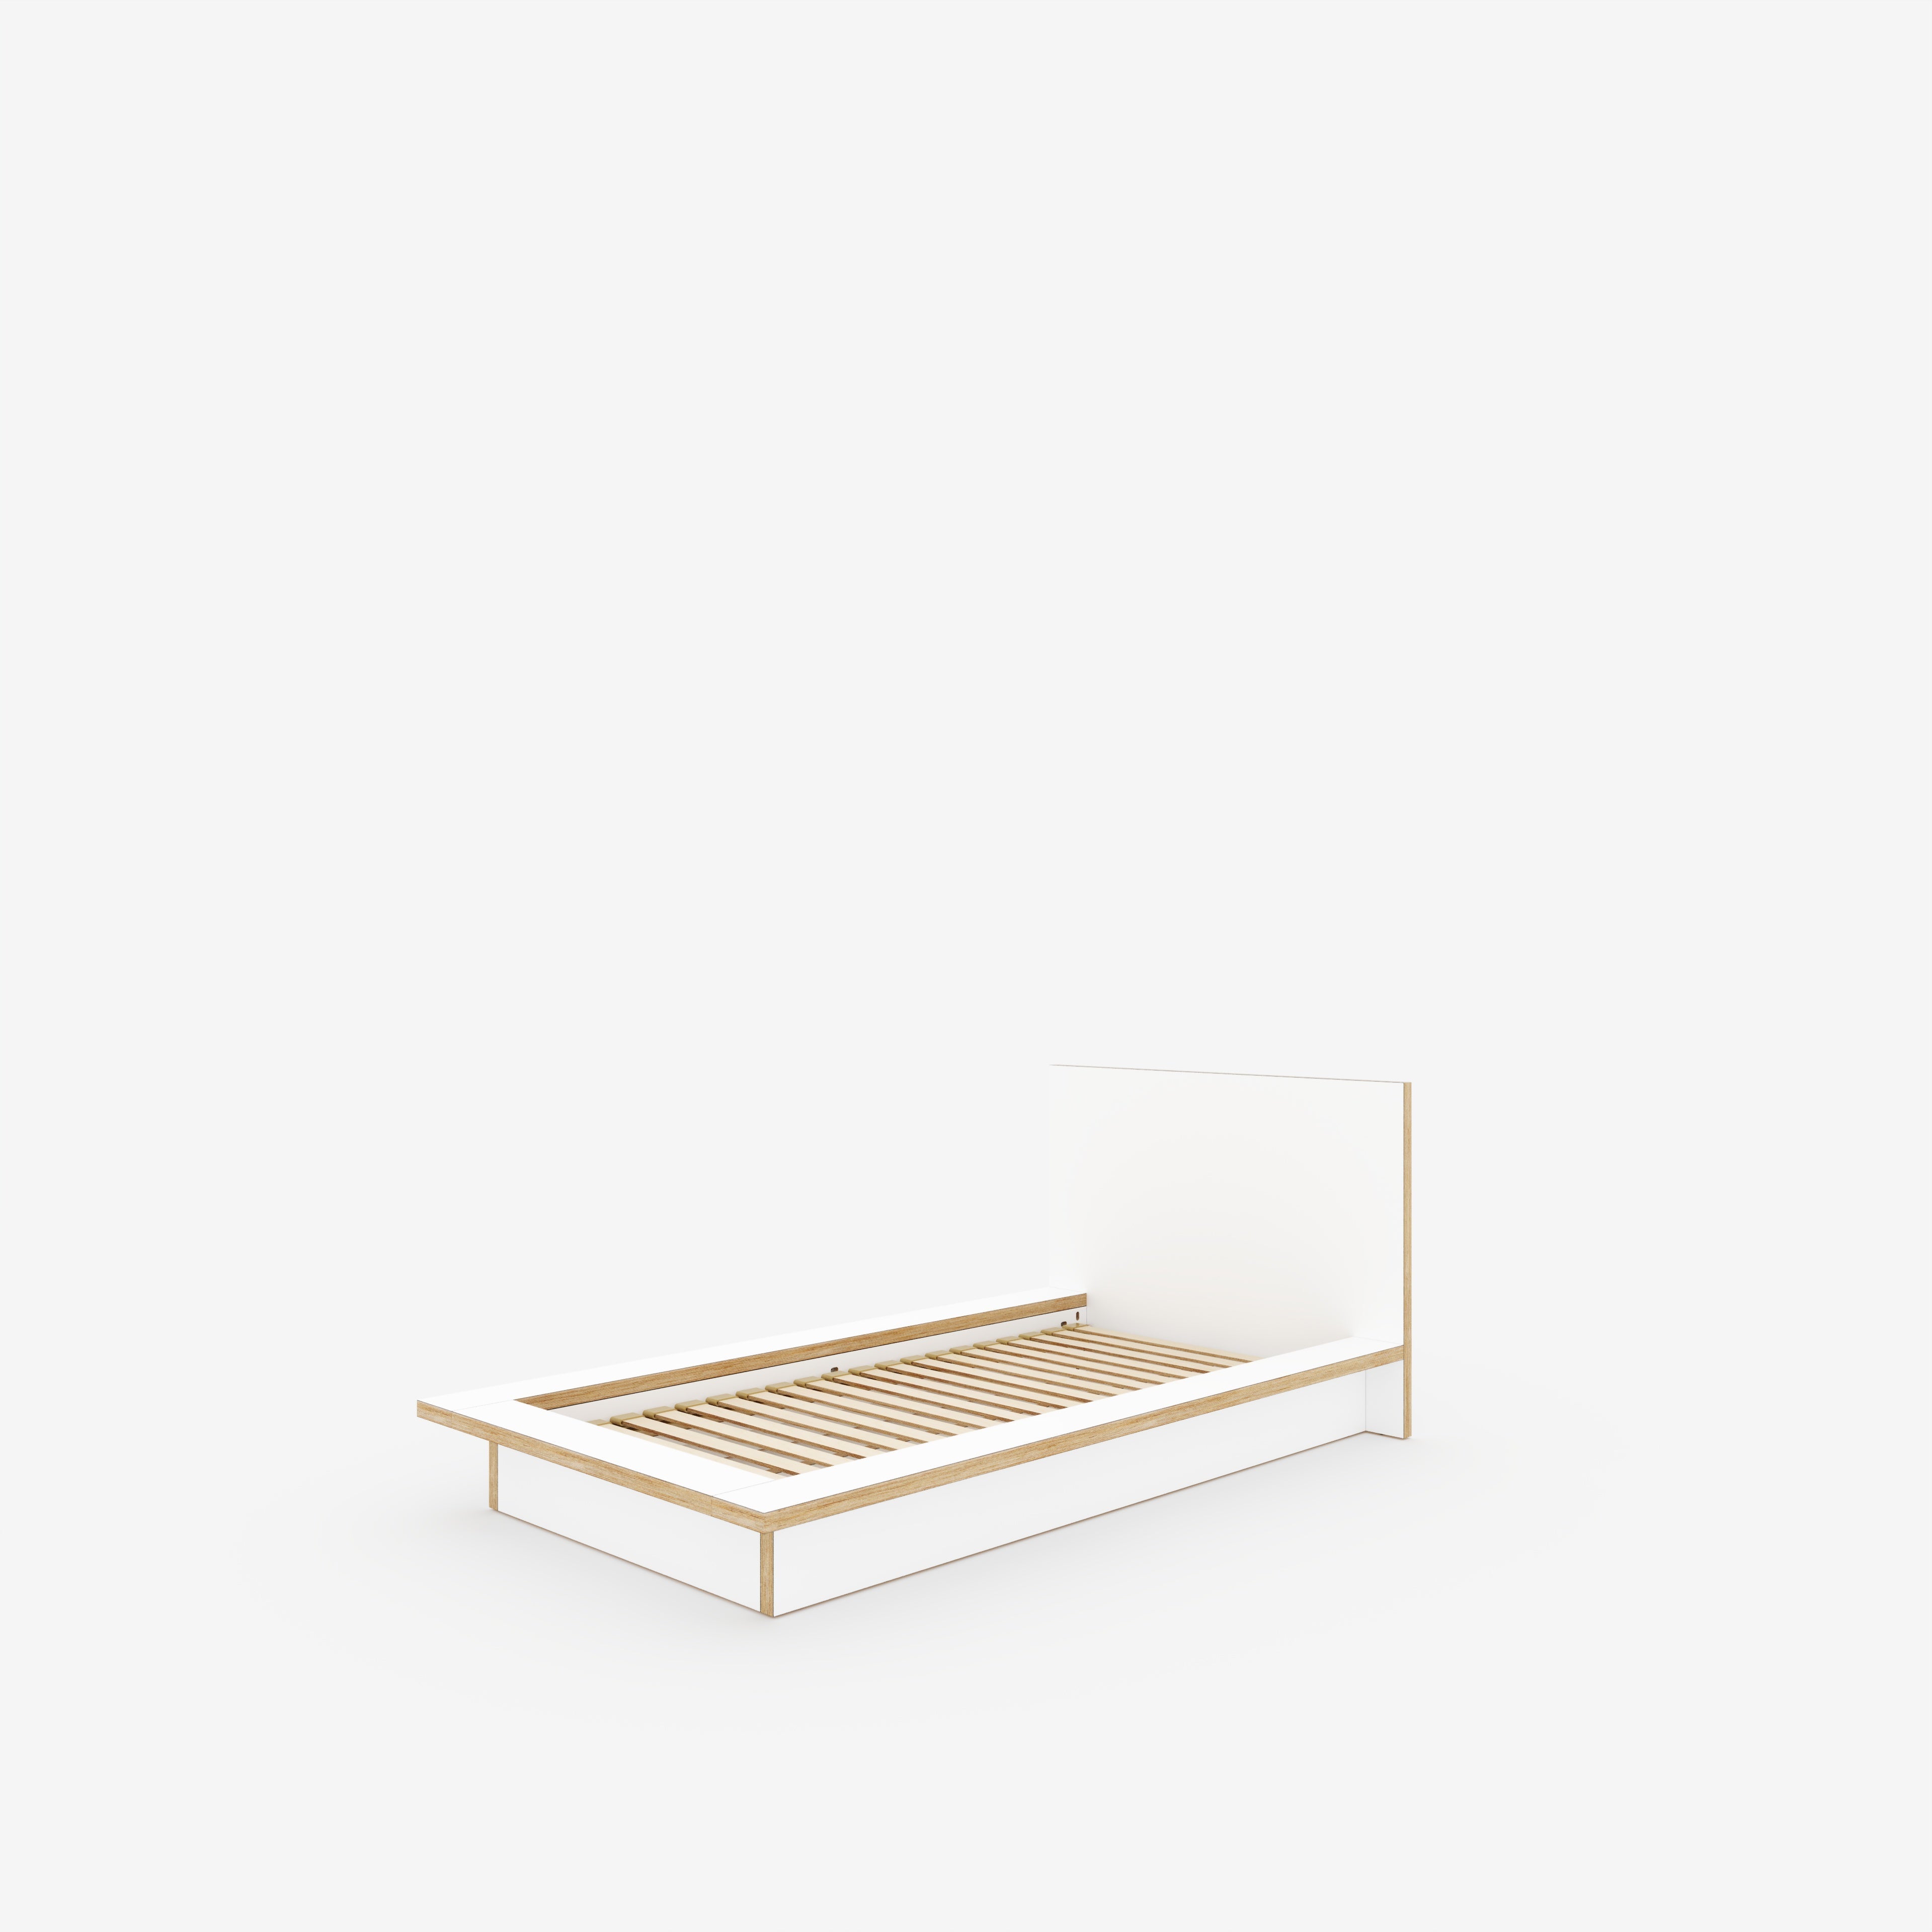 Plywood Platform Bed - Plywood Formica White - Standard Single 900(w) x 1900(d) - Low